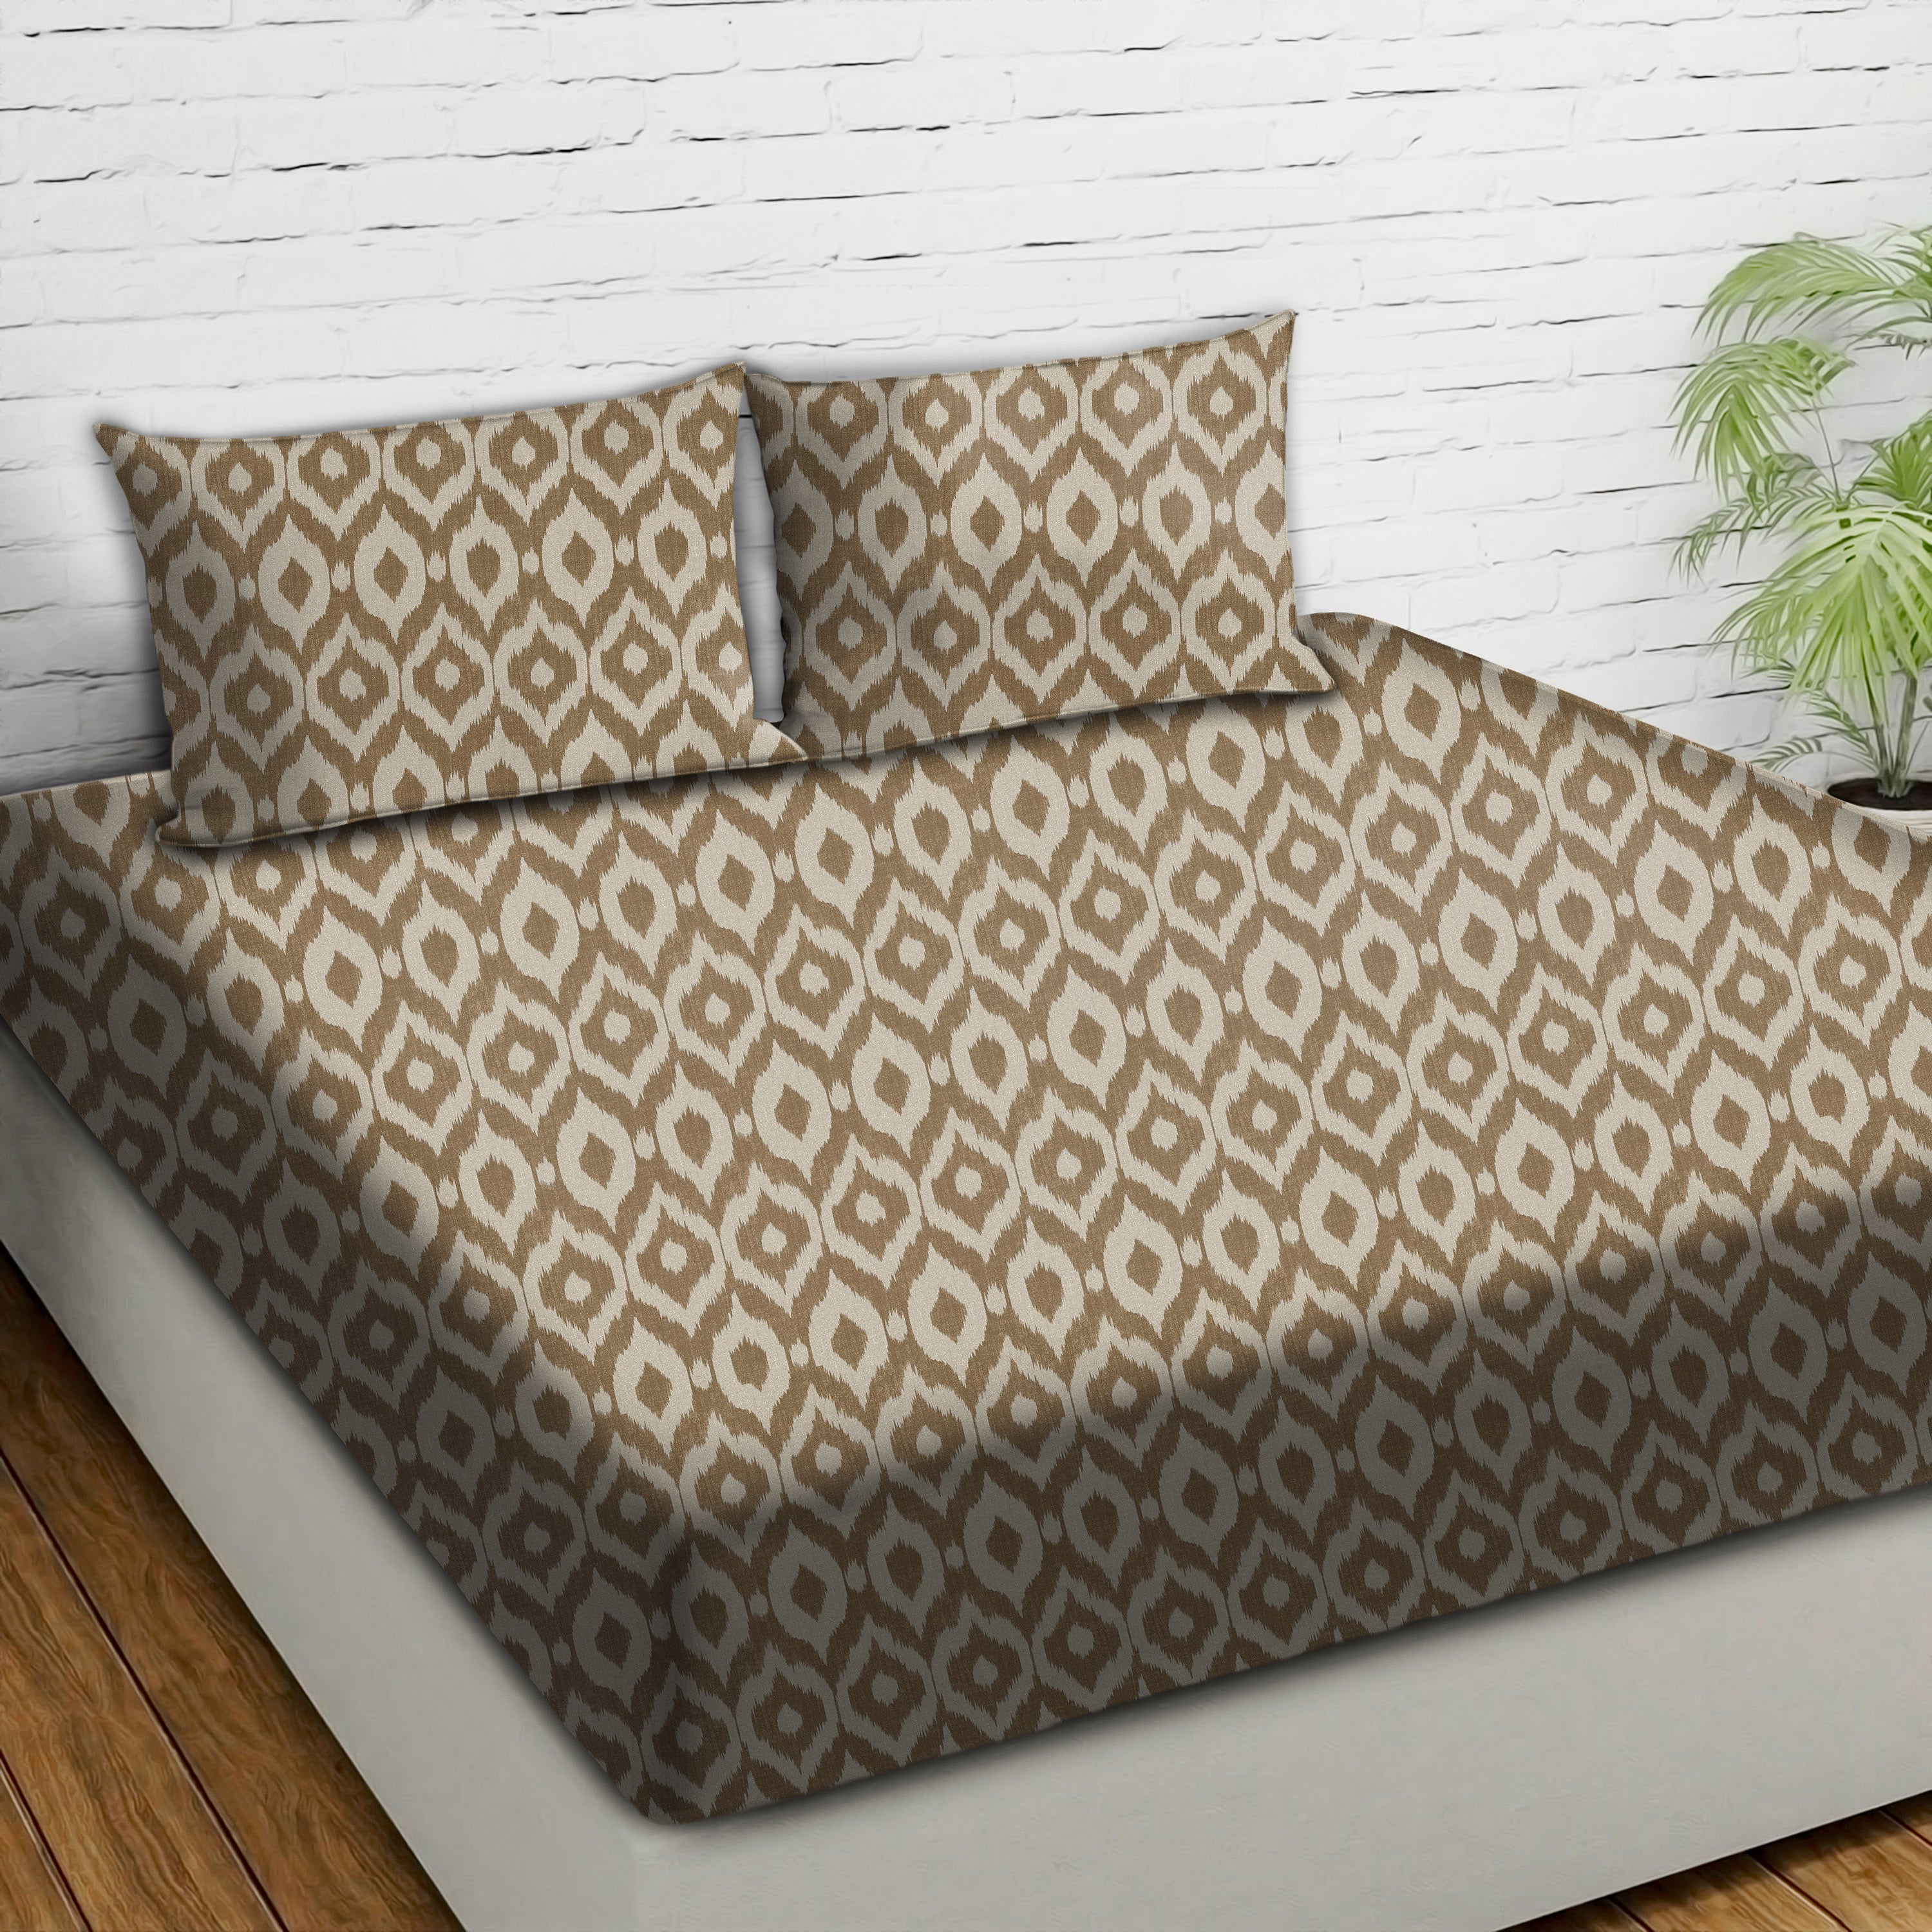 Bedcover Bistre Brown for Double Bed with 2 Pillow Covers King Size (104" X 90")